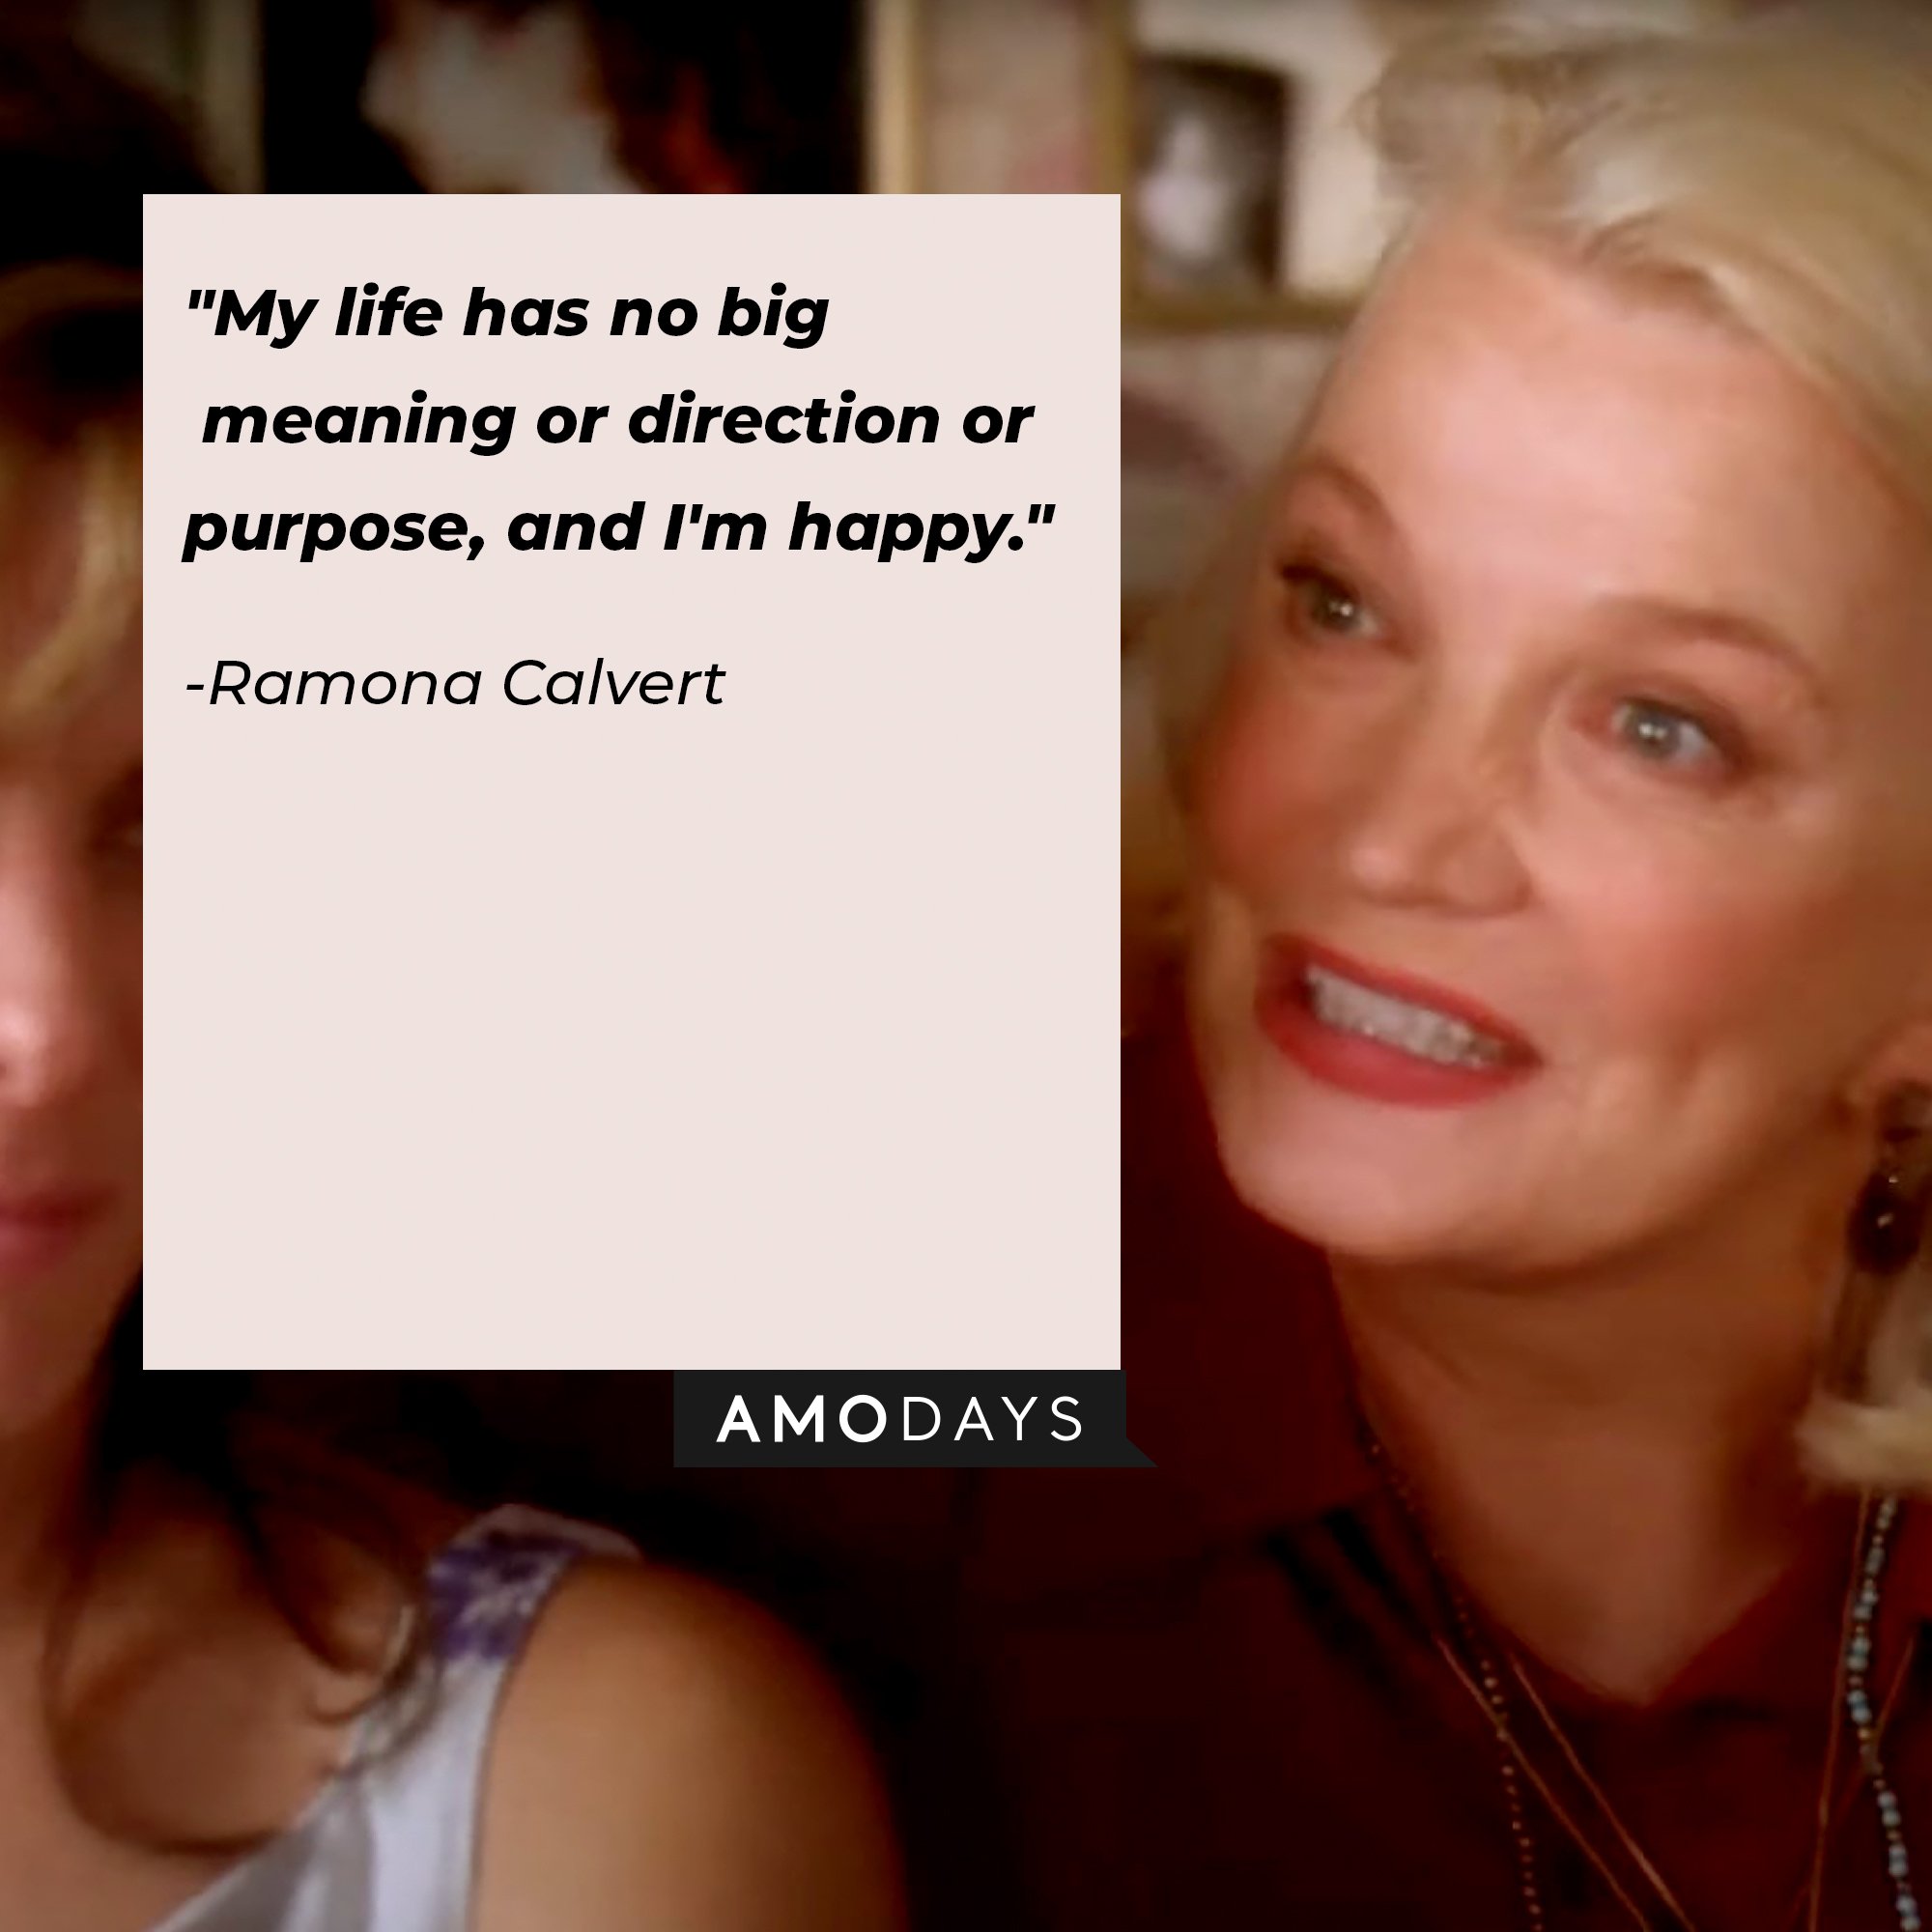  Ramona Calvert’s quote: "My life has no big meaning or direction or purpose, and I'm happy." |  Image: AmoDays